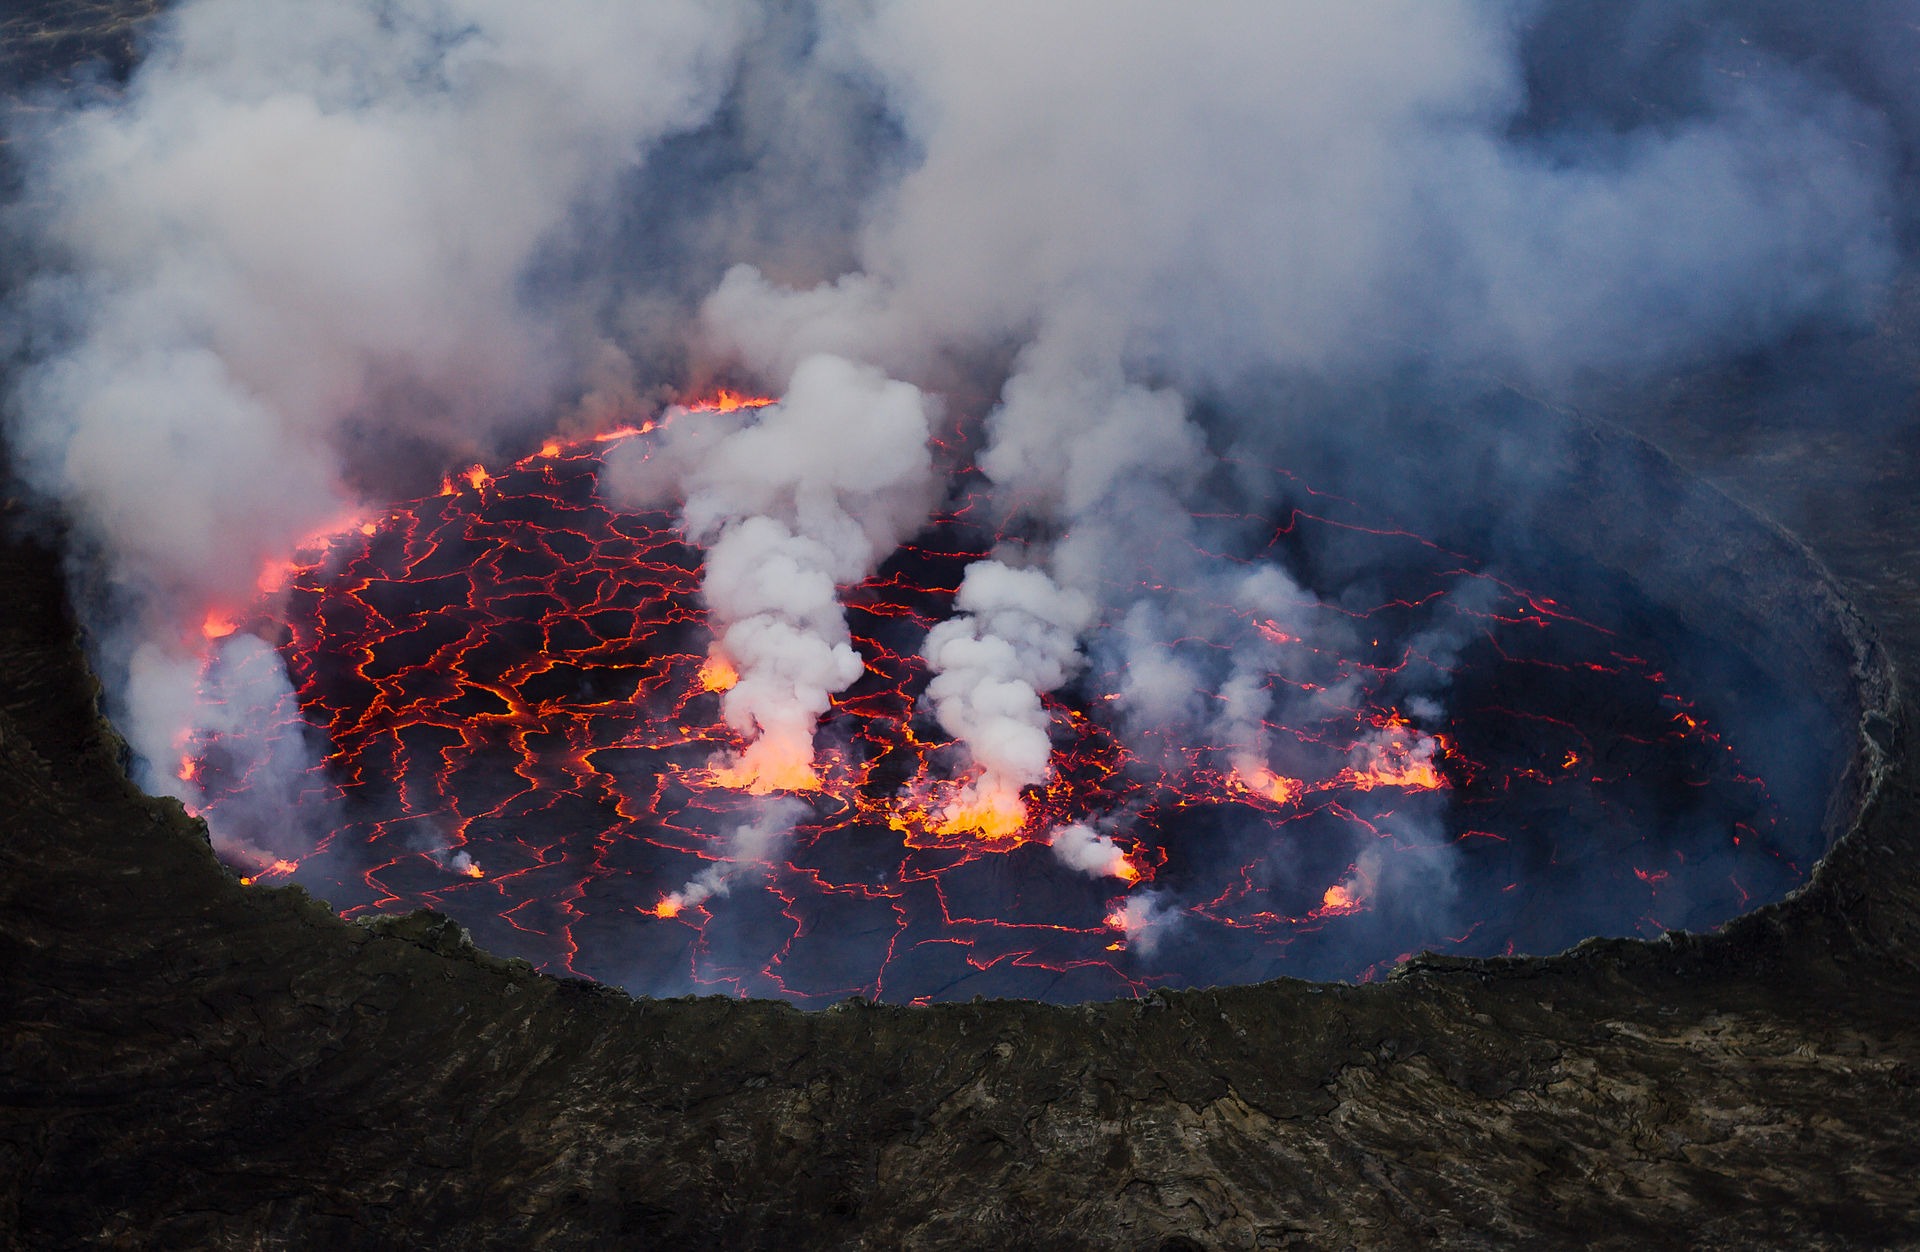 Photo of the Virunga National Park World Heritage site. Virunga national park in the Democratic Republic of the Congo has no less than seven volcanoes, two of which are the most active in Africa. The Nyiragongo volcano features a liquid, alkaline lava lake that fills its entire crater. The volcano’s periodic eruptions have catastrophic consequences for the surrounding areas. Photo: Cai Tjeenk Willink (CC BY-SA.3.0) via Wikimedia Commons